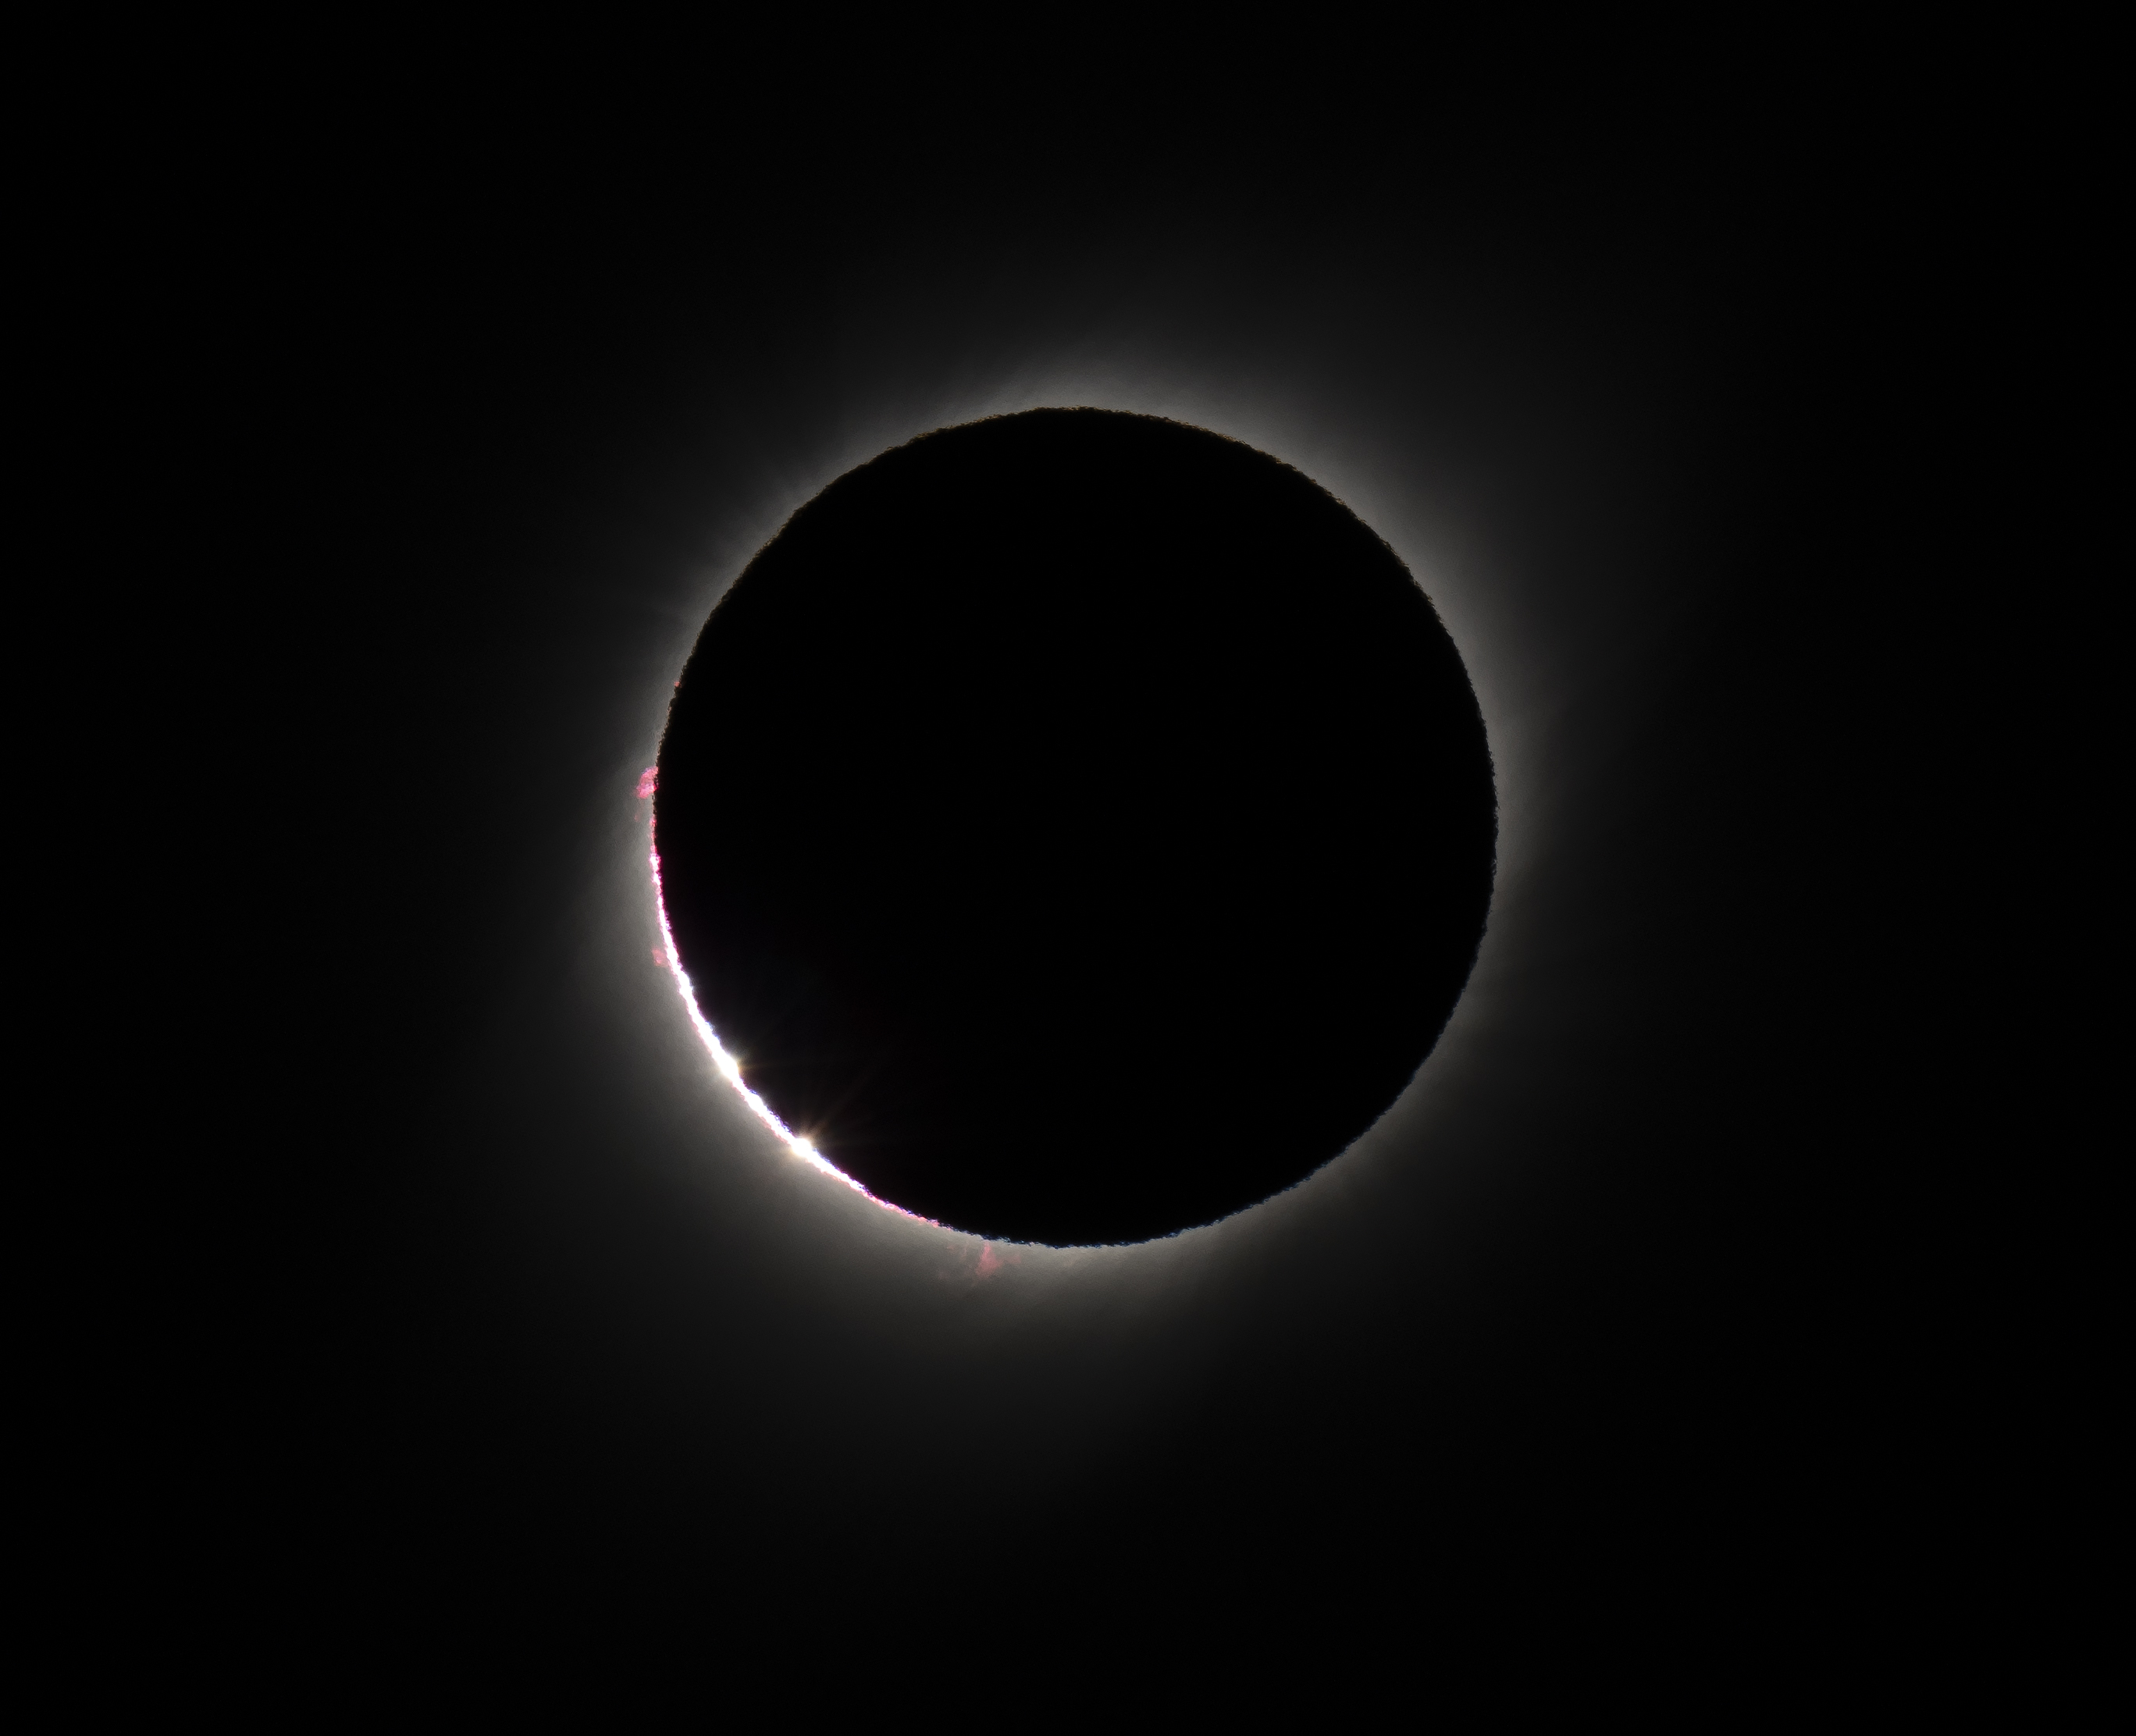 Solar eclipse with moon covering the sun, leaving a thin, bright outline visible